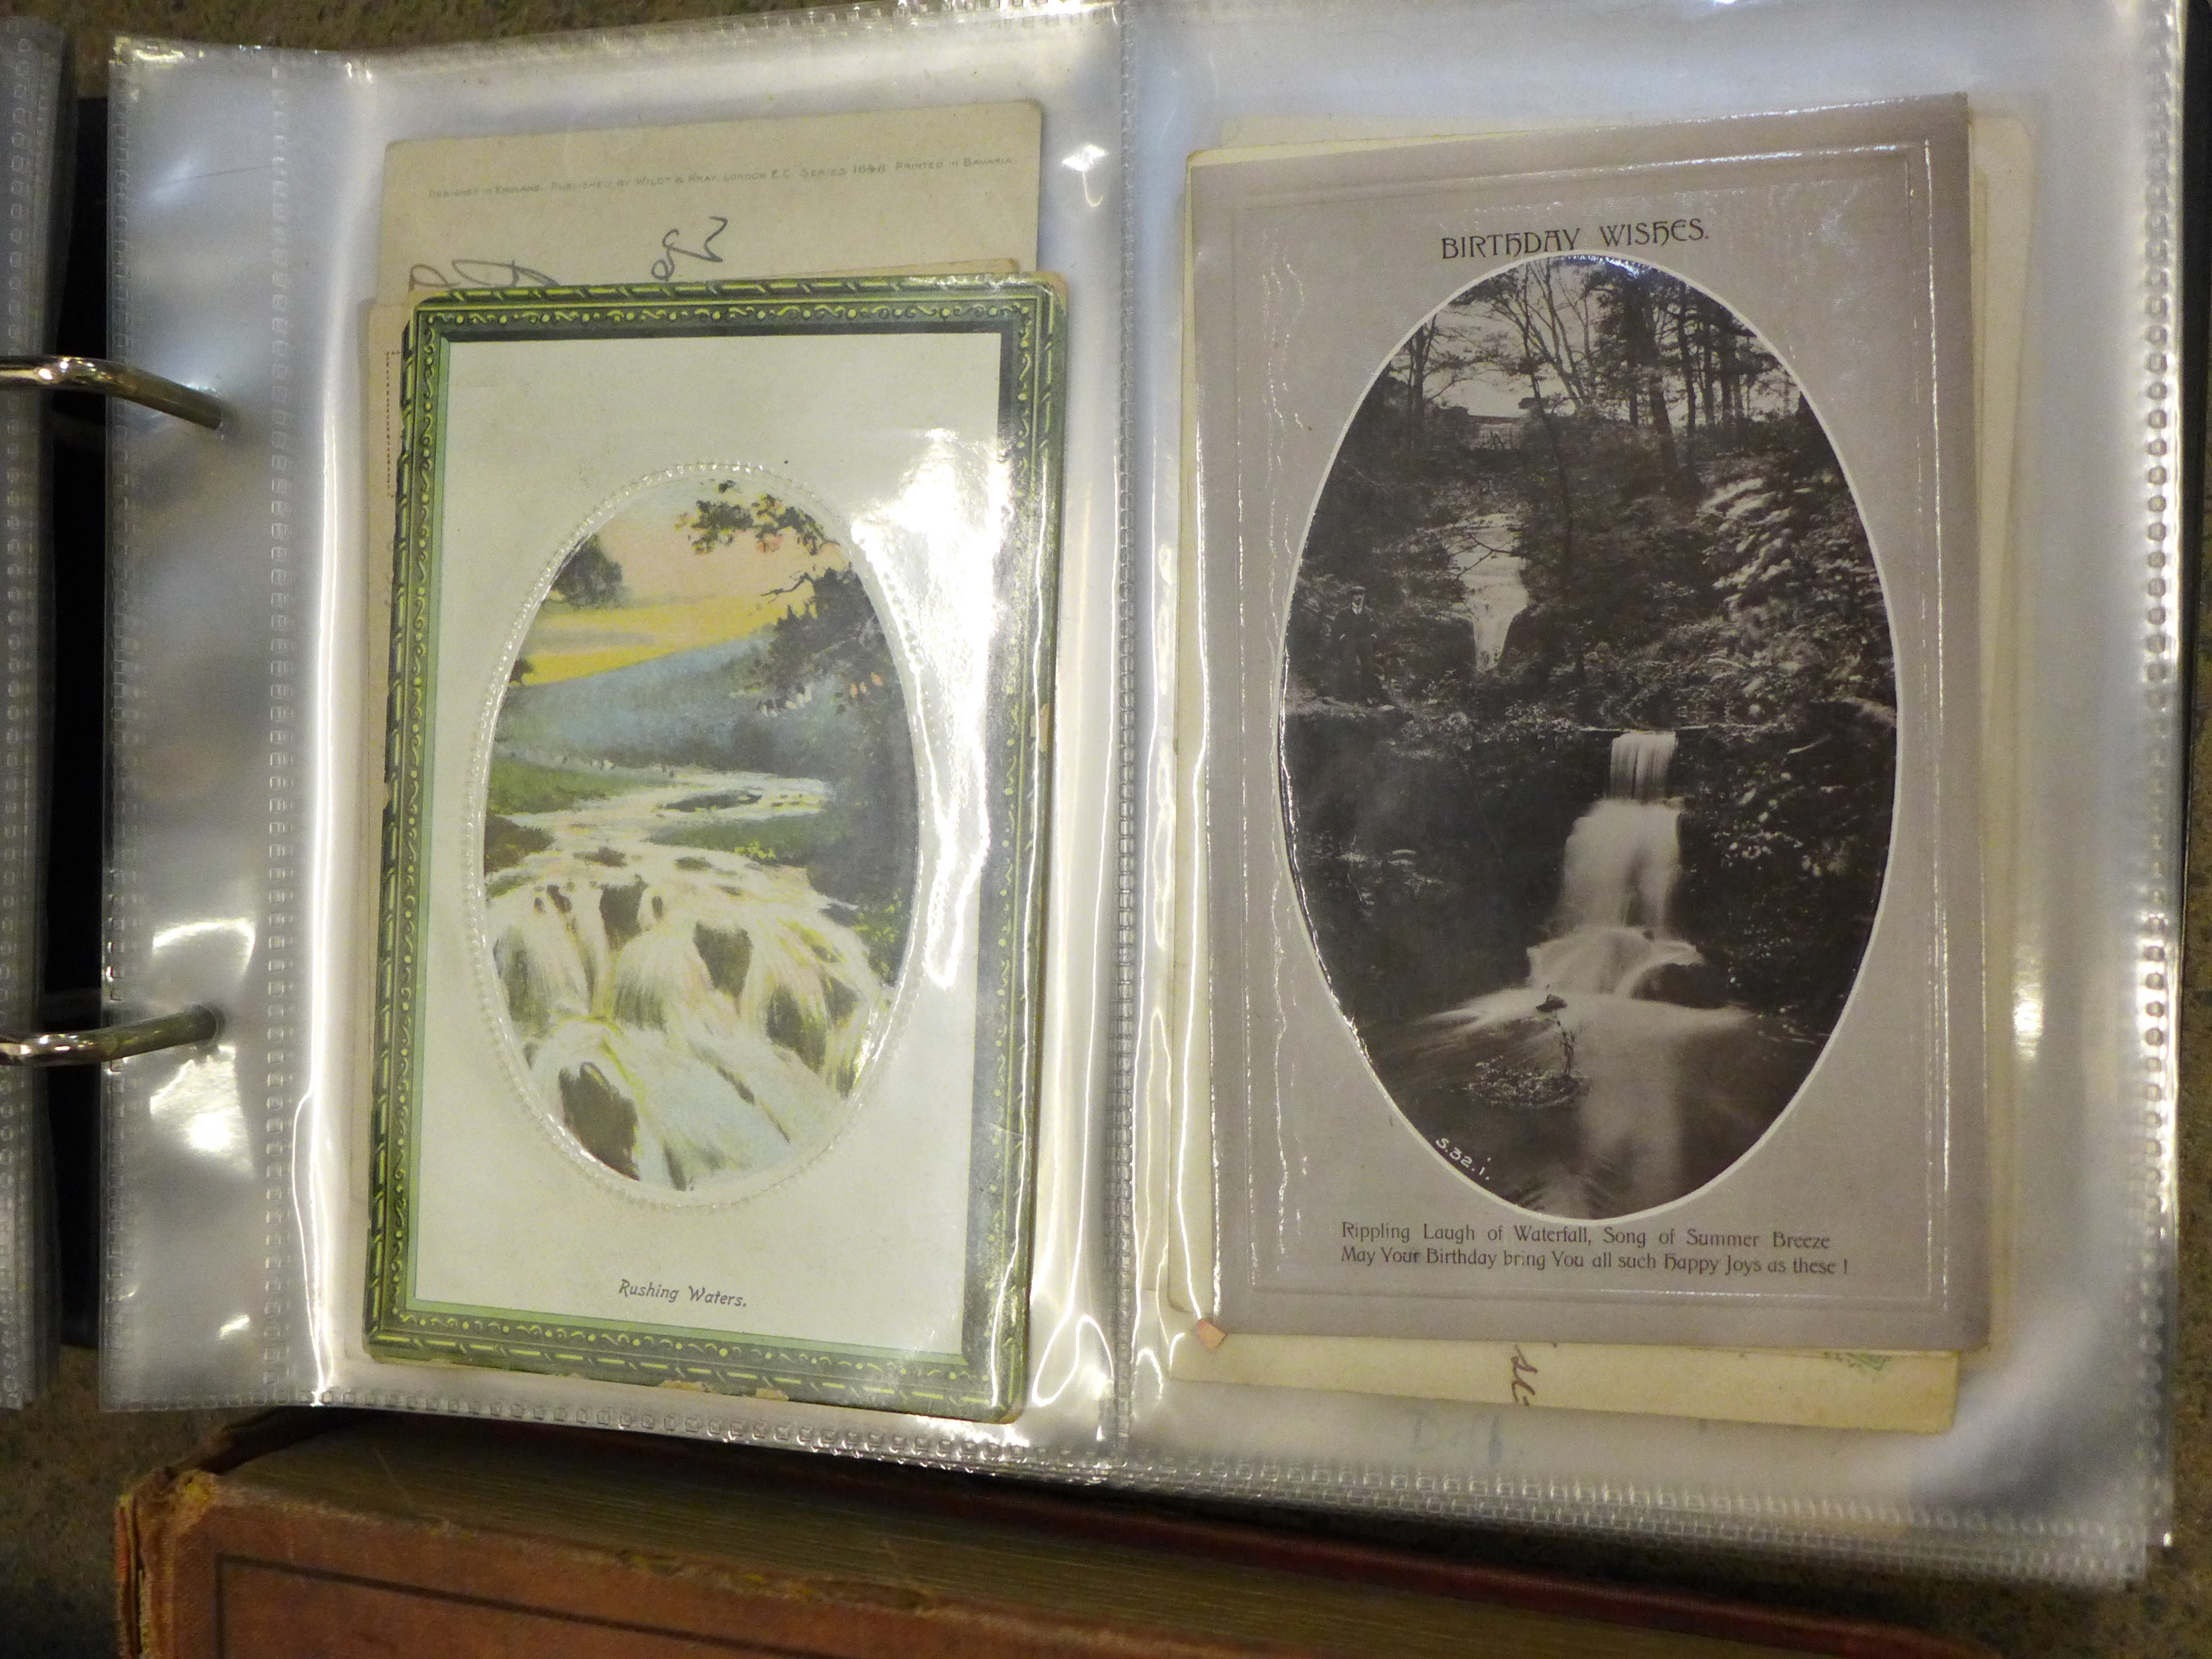 A collection of vintage postcards and album and one volume, The Pickwick Papers with plates - Image 7 of 12